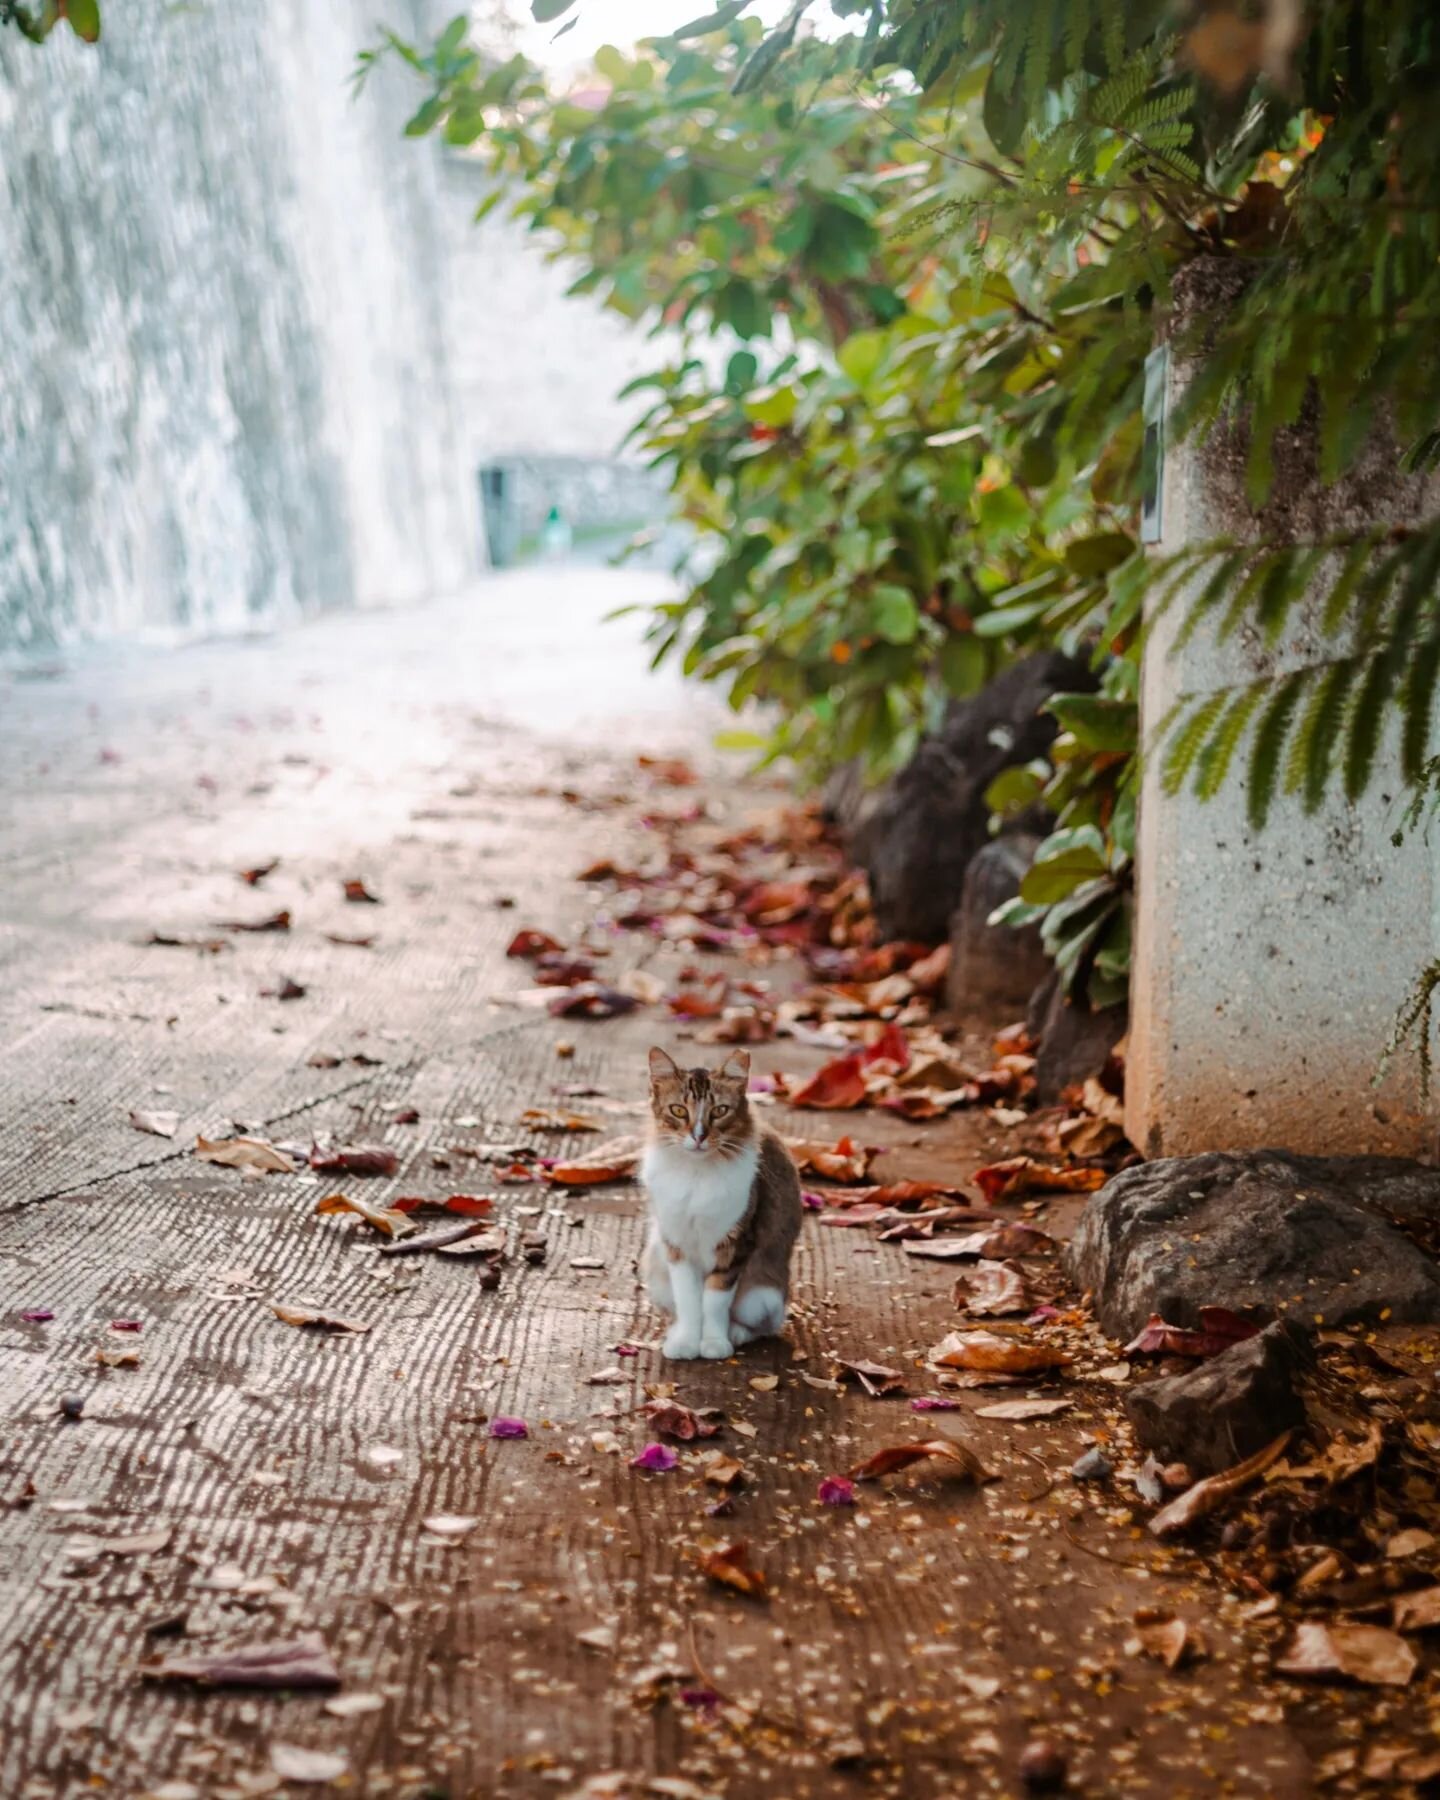 I didn't know cats run Old San Juan.
They are everywhere.